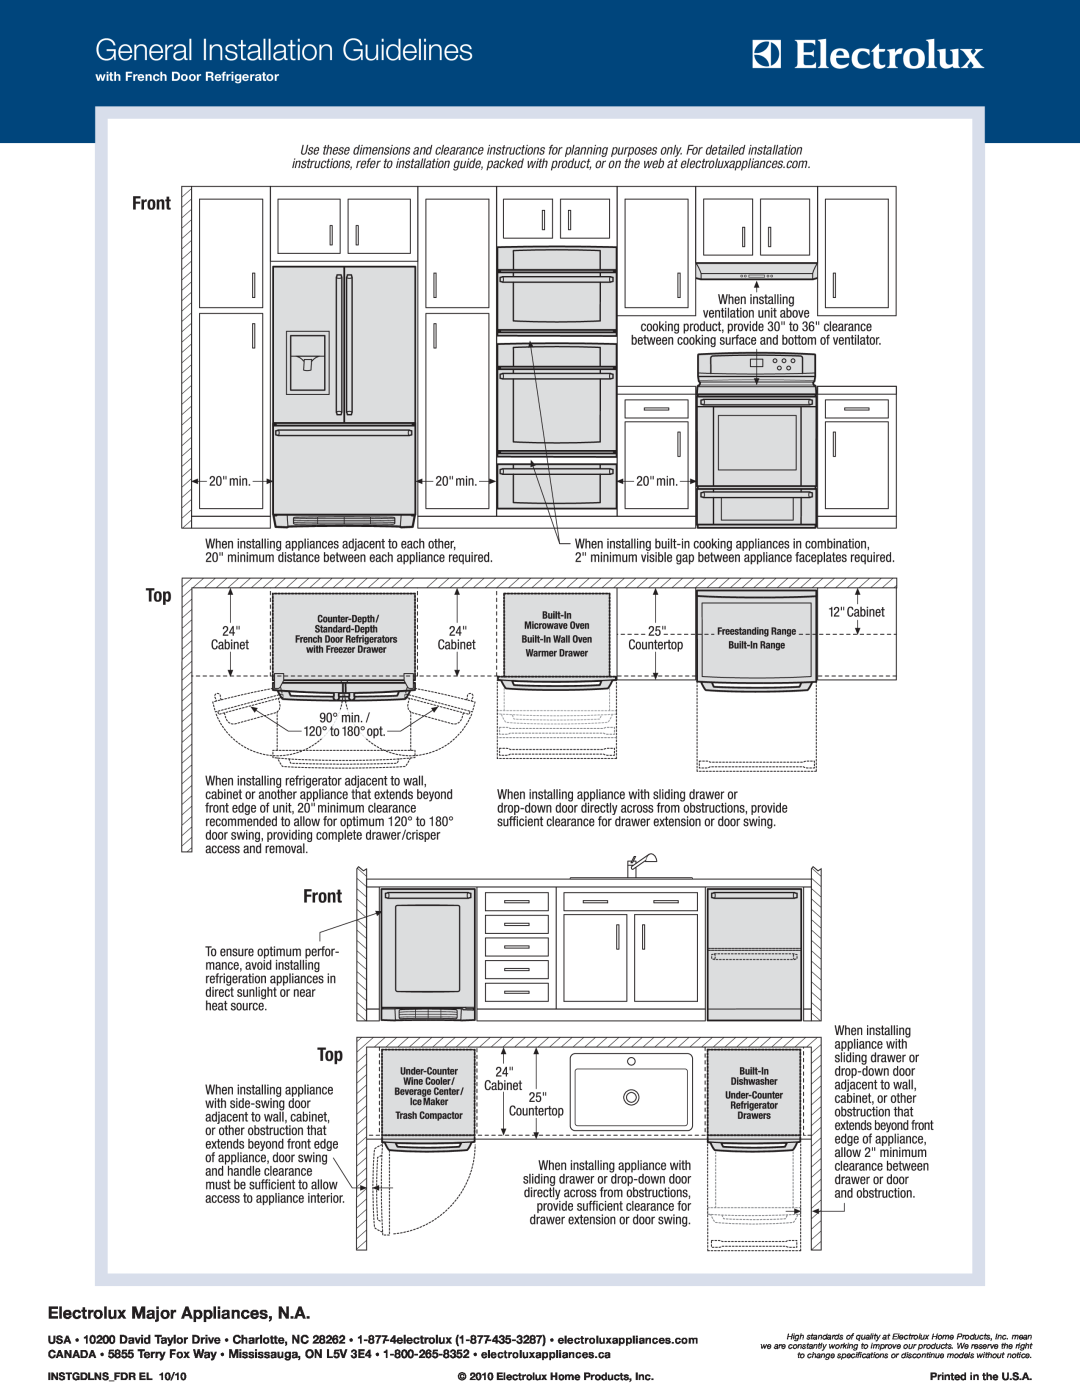 Electrolux EI27BS16J B, EI27BS16J W, EI27BS16J S General Installation Guidelines, Electrolux Major Appliances, N.A, Front 